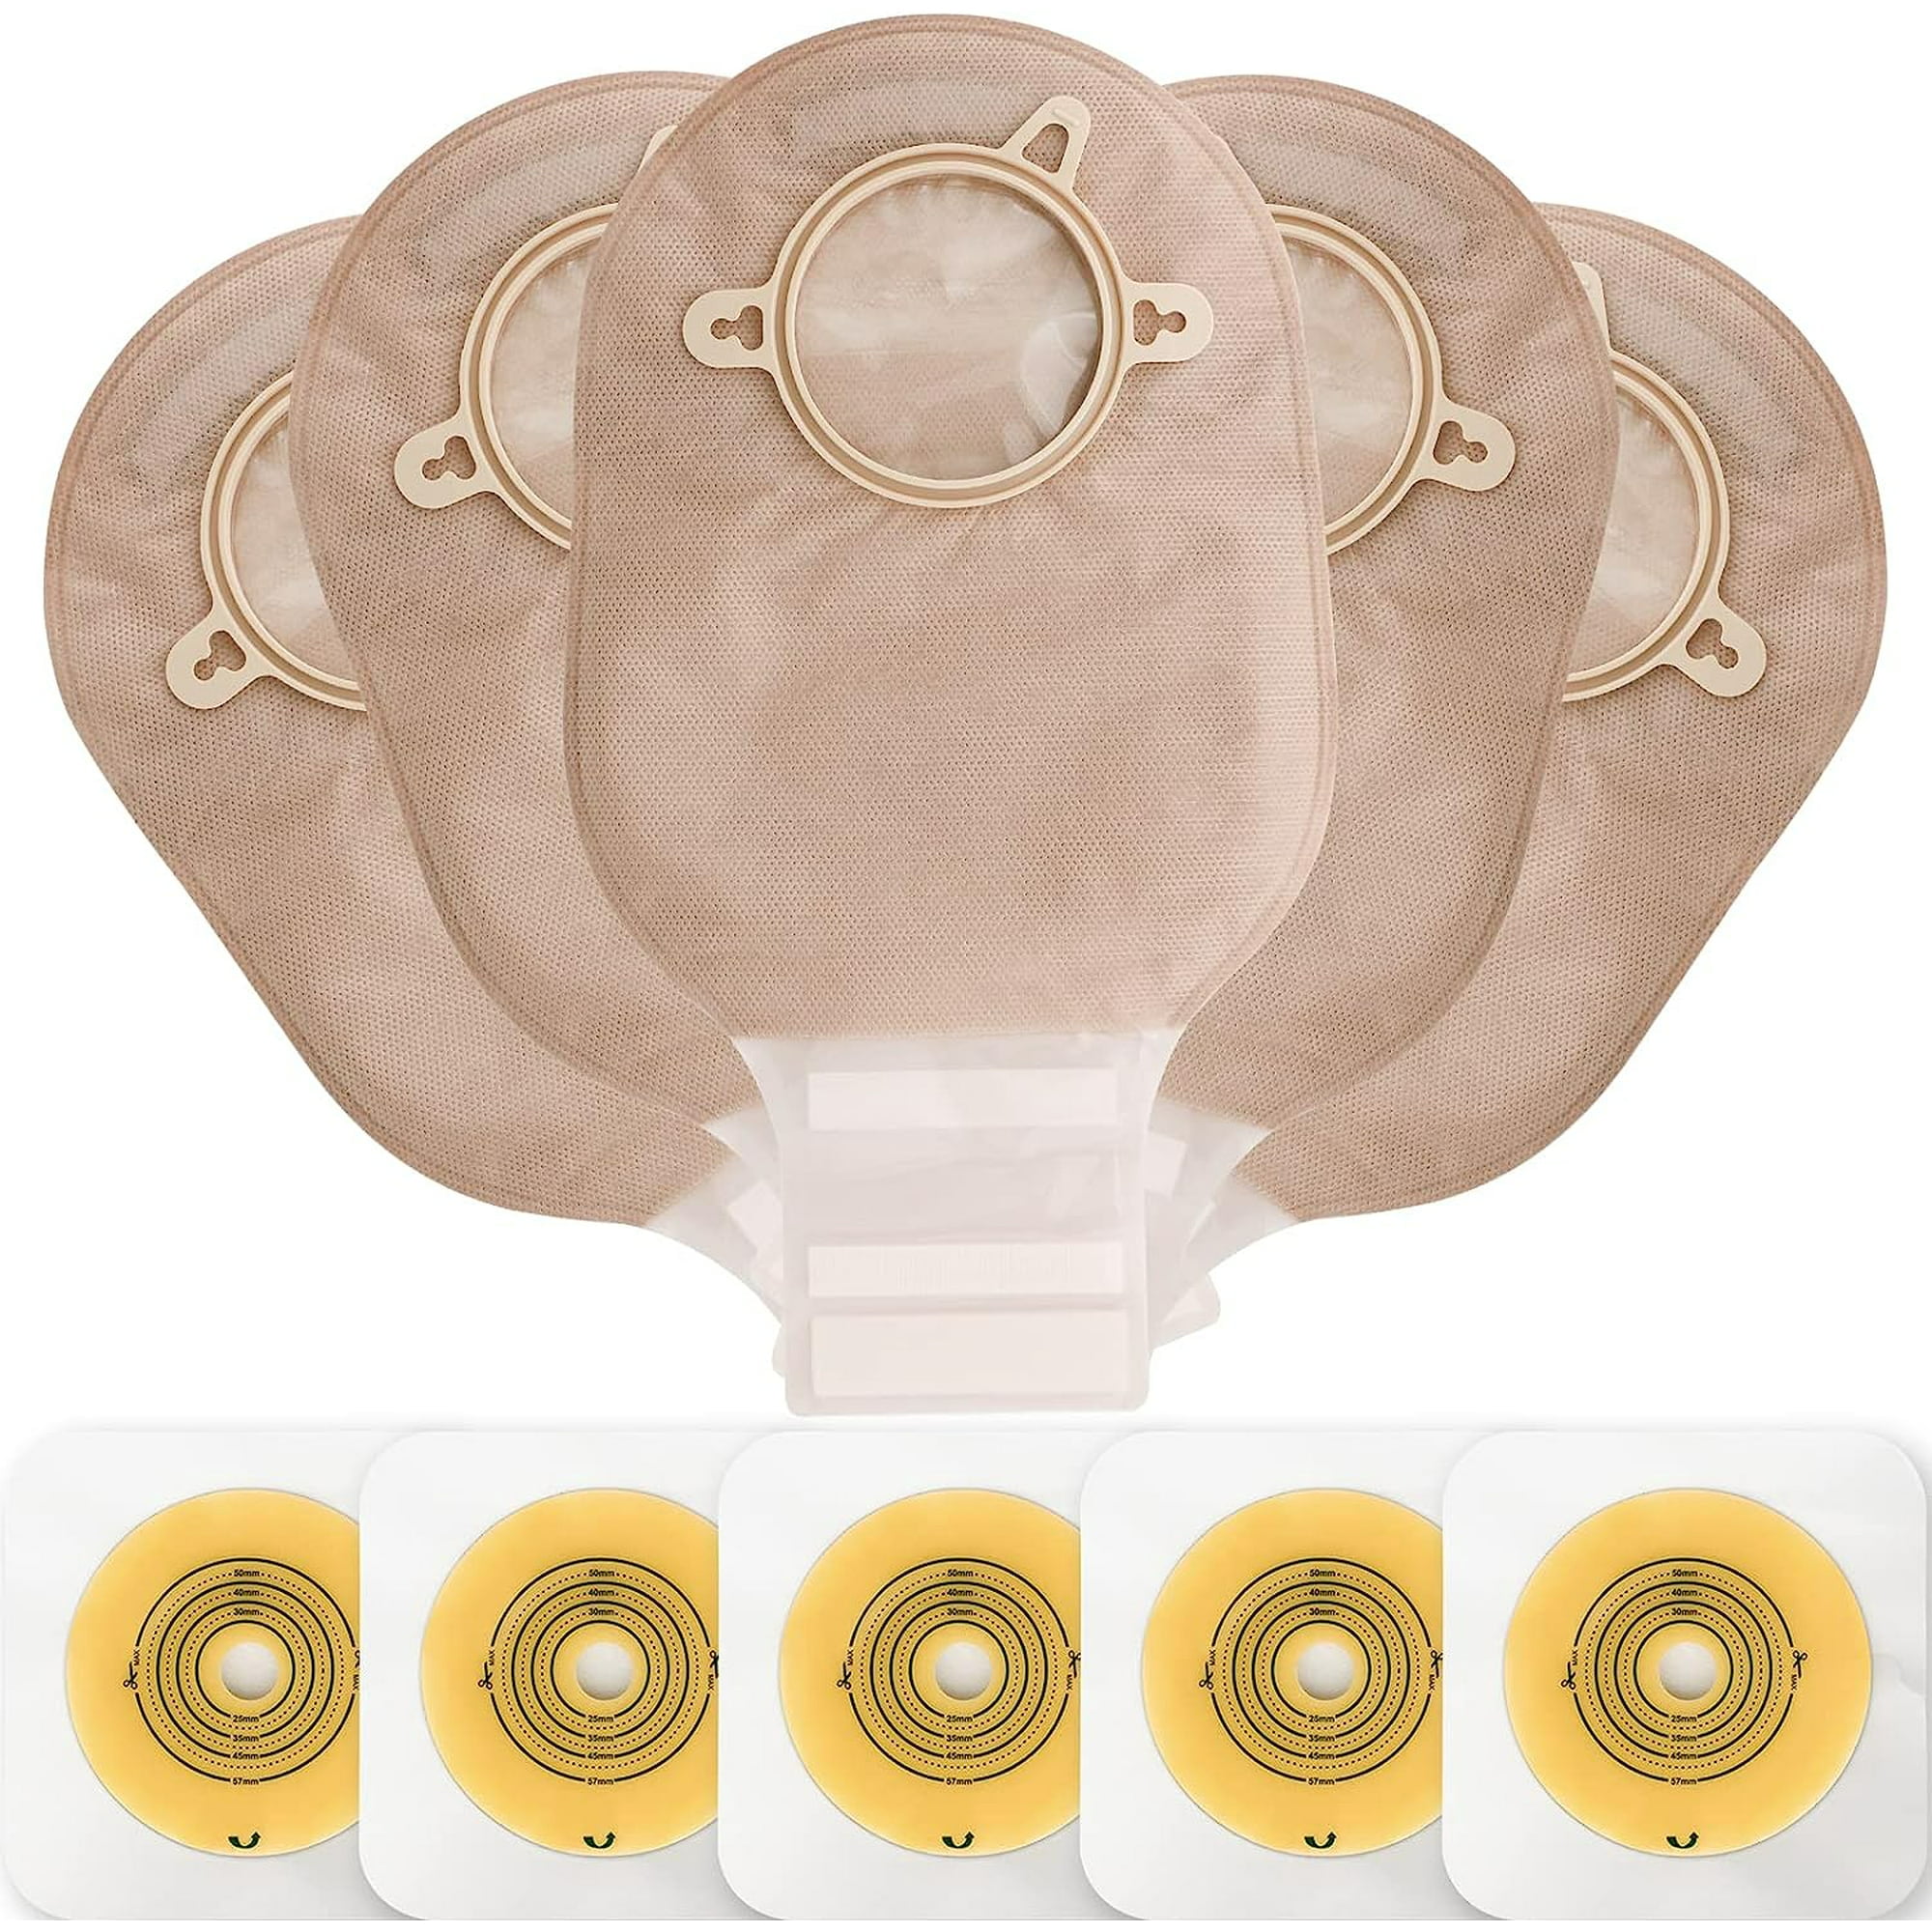 Hollister 8331 Premier 1-Piece Drainable Ostomy Pouch w/ Filter-10/Box 